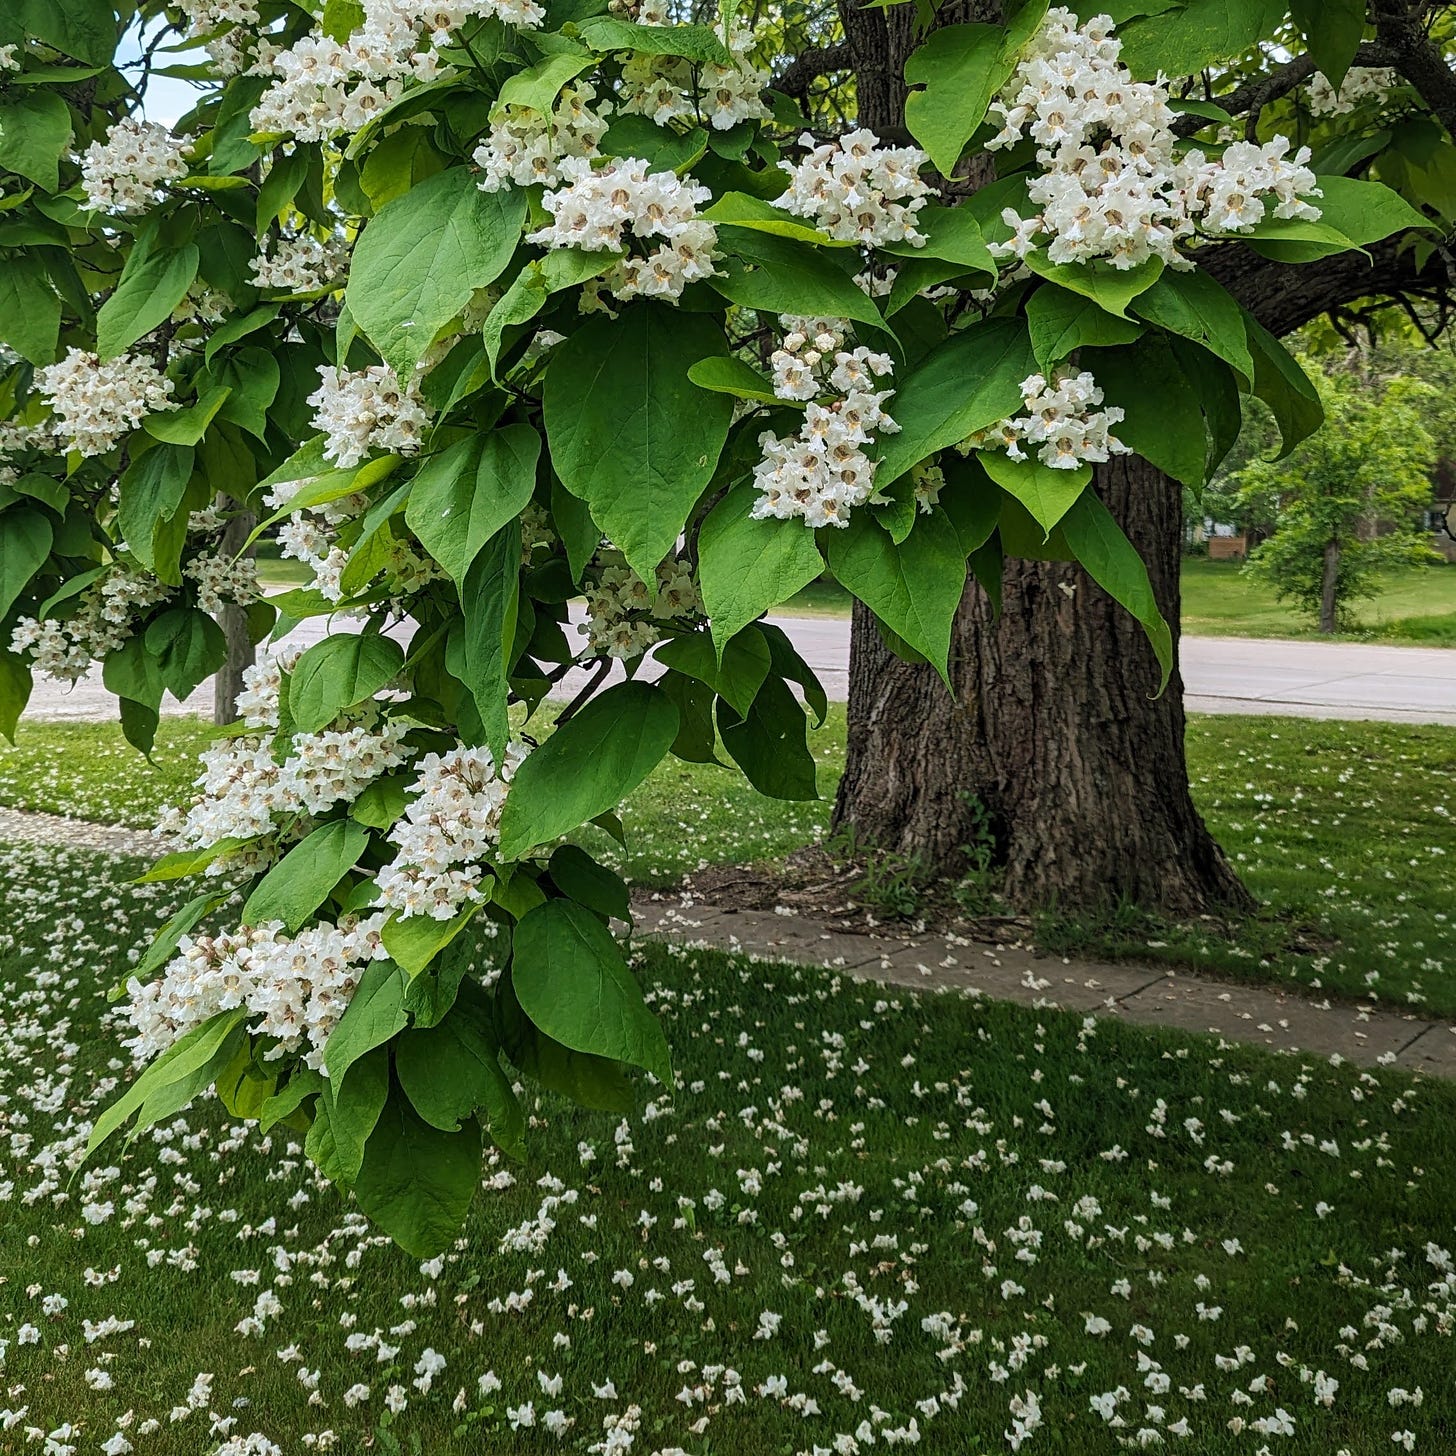 A catalpa tree with large heart-shaped leaves and white blossoms